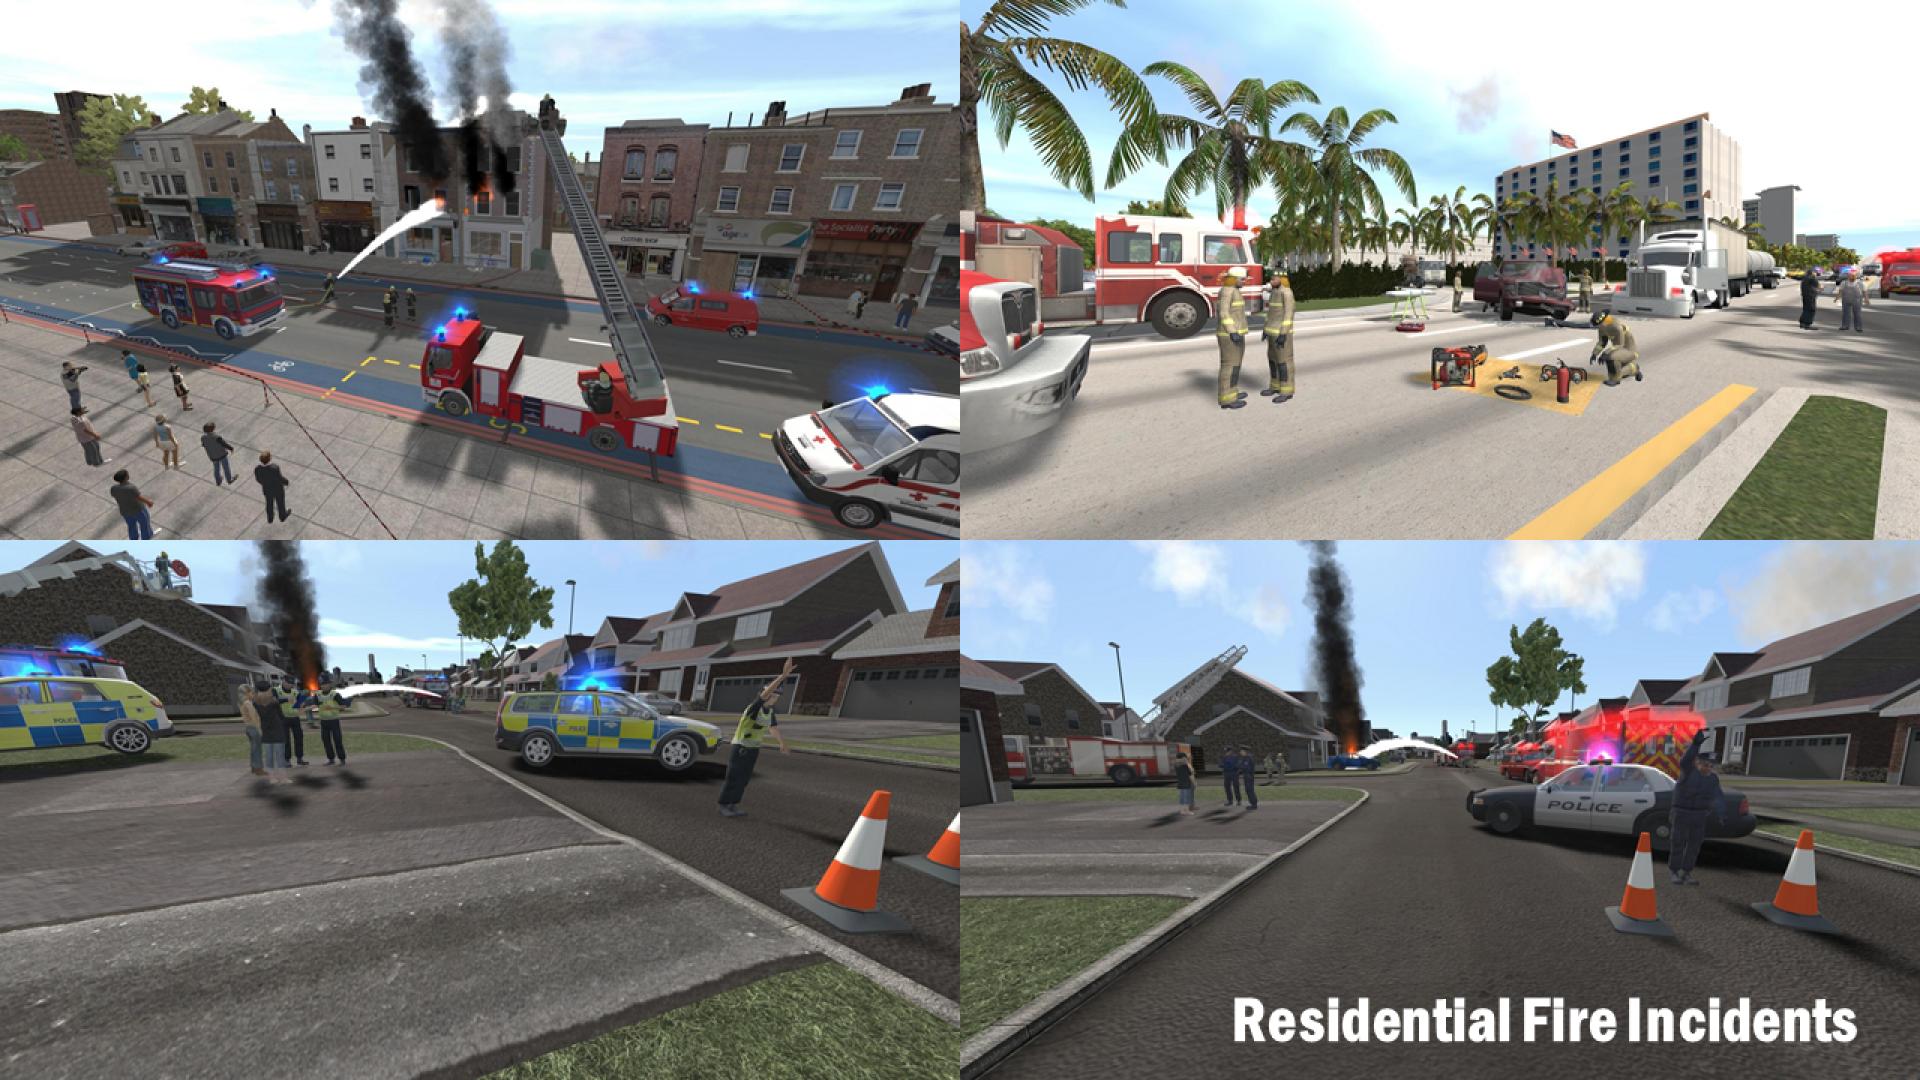 Screenshots of residential fires